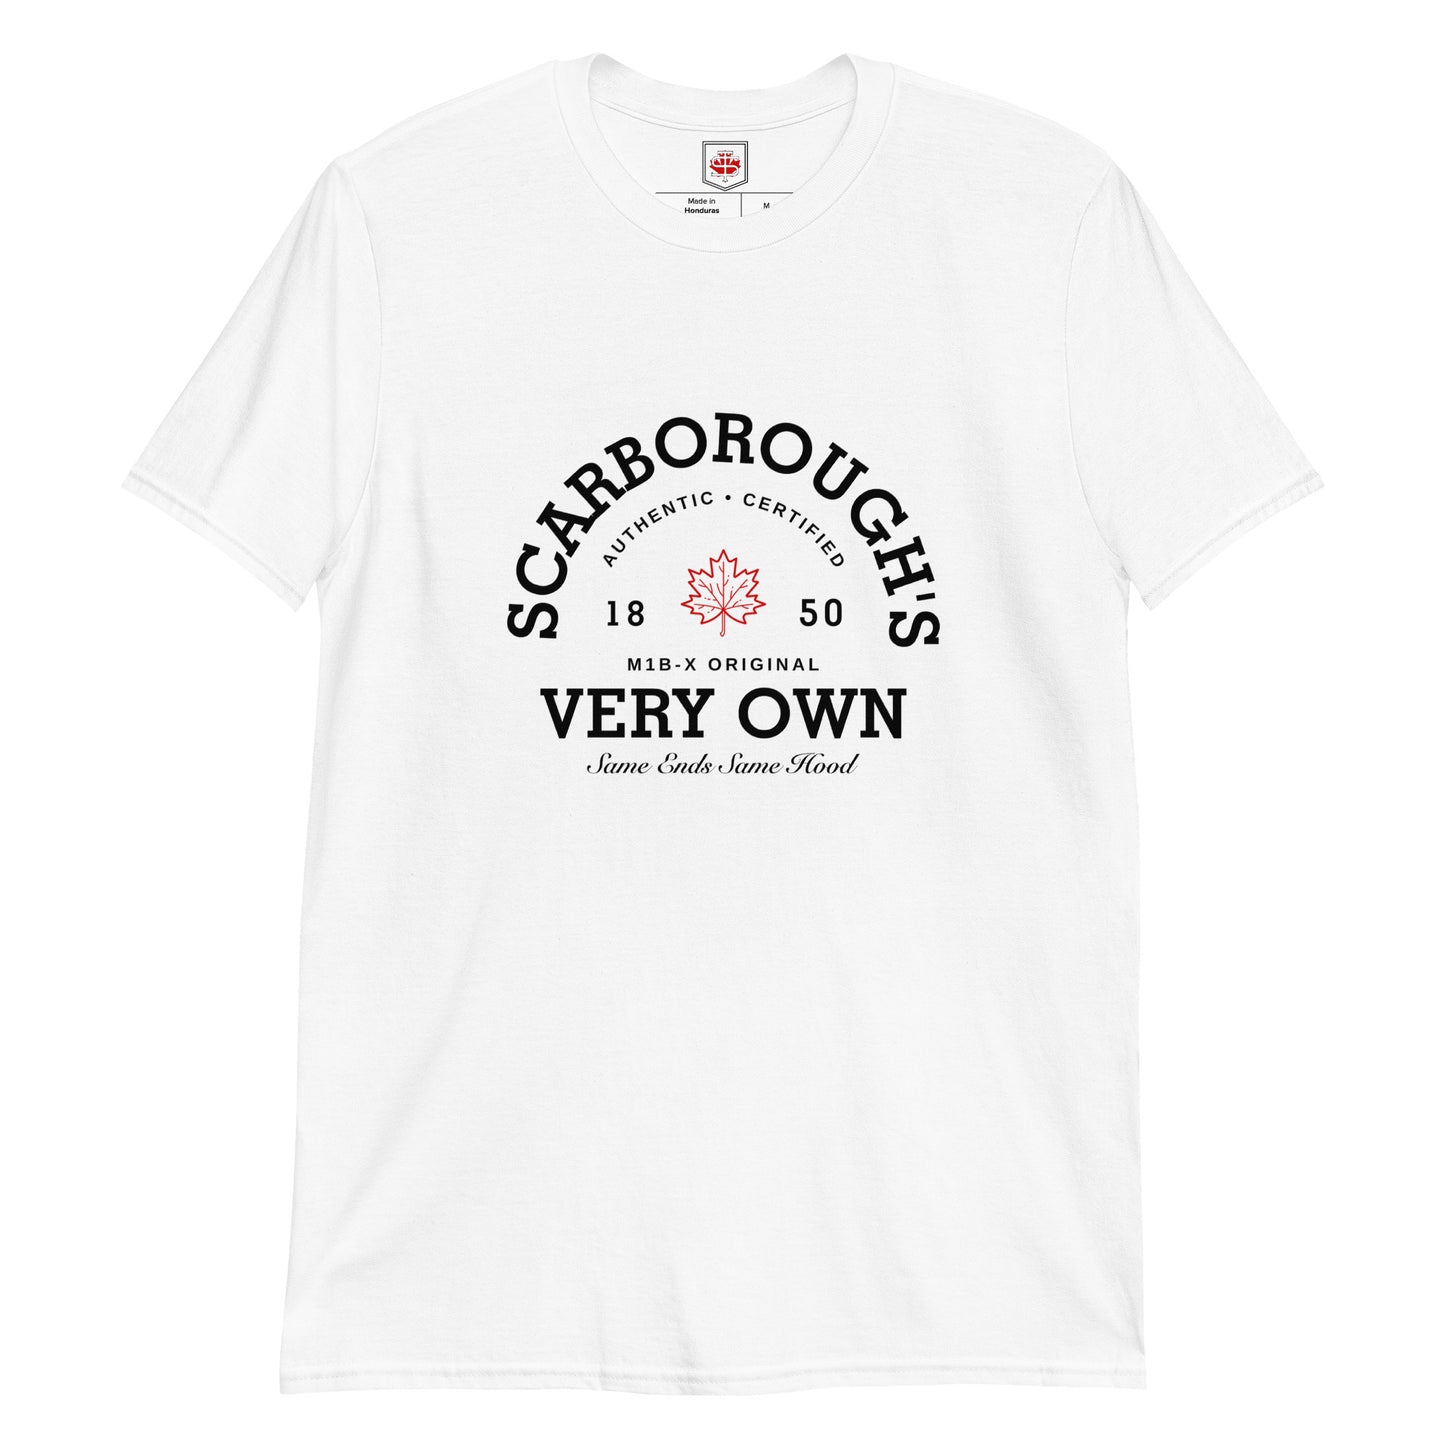 Scarborough's Very Own - T-Shirt